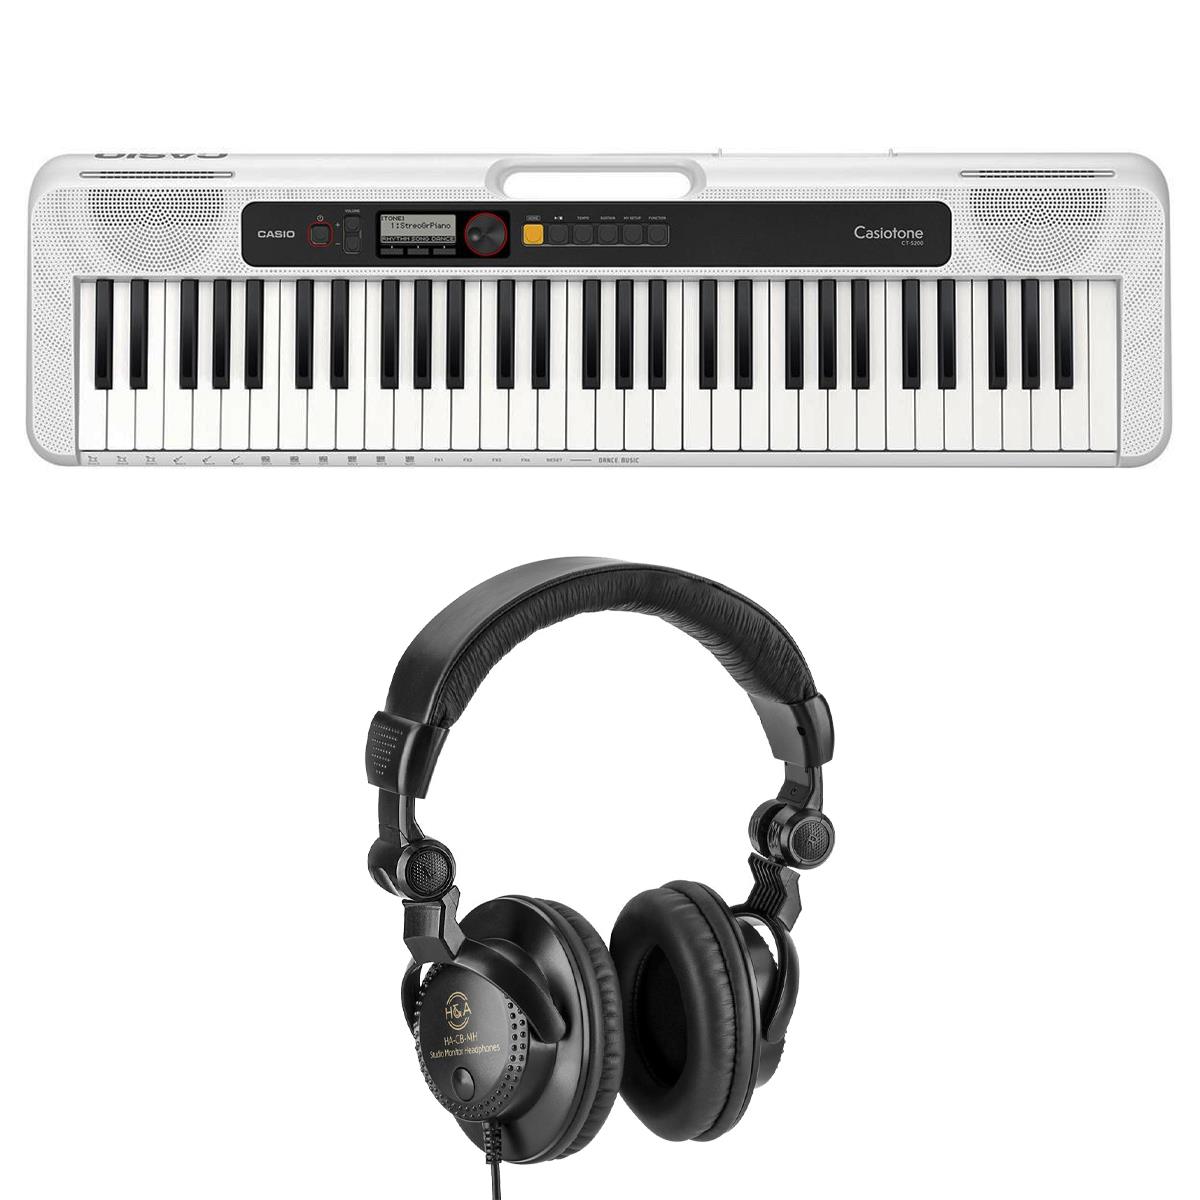 Image of Casio CT-S200 61-Key Digital Portable Keyboard (White) with Headphones